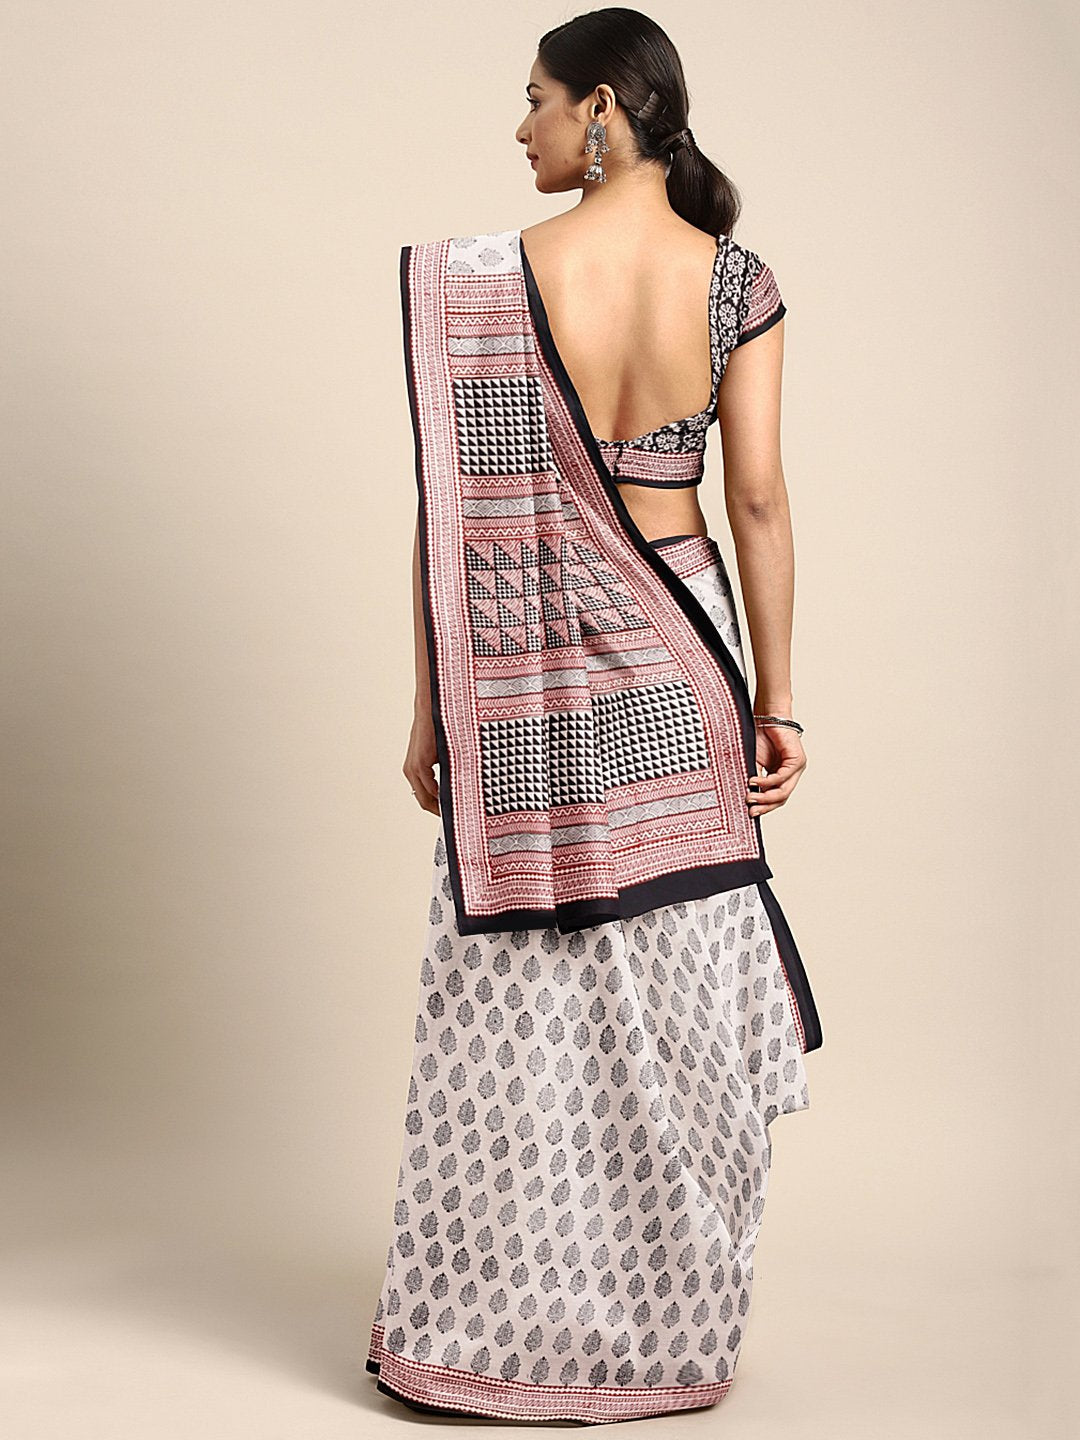 Off-White Black Pure Cotton Handblock Print Bagh Saree-Saree-Kalakari India-MRBASA0017-Bagh, Cotton, Geographical Indication, Hand Blocks, Hand Crafted, Heritage Prints, Natural Dyes, Sarees, Sustainable Fabrics-[Linen,Ethnic,wear,Fashionista,Handloom,Handicraft,Indigo,blockprint,block,print,Cotton,Chanderi,Blue, latest,classy,party,bollywood,trendy,summer,style,traditional,formal,elegant,unique,style,hand,block,print, dabu,booti,gift,present,glamorous,affordable,collectible,Sari,Saree,printed, 